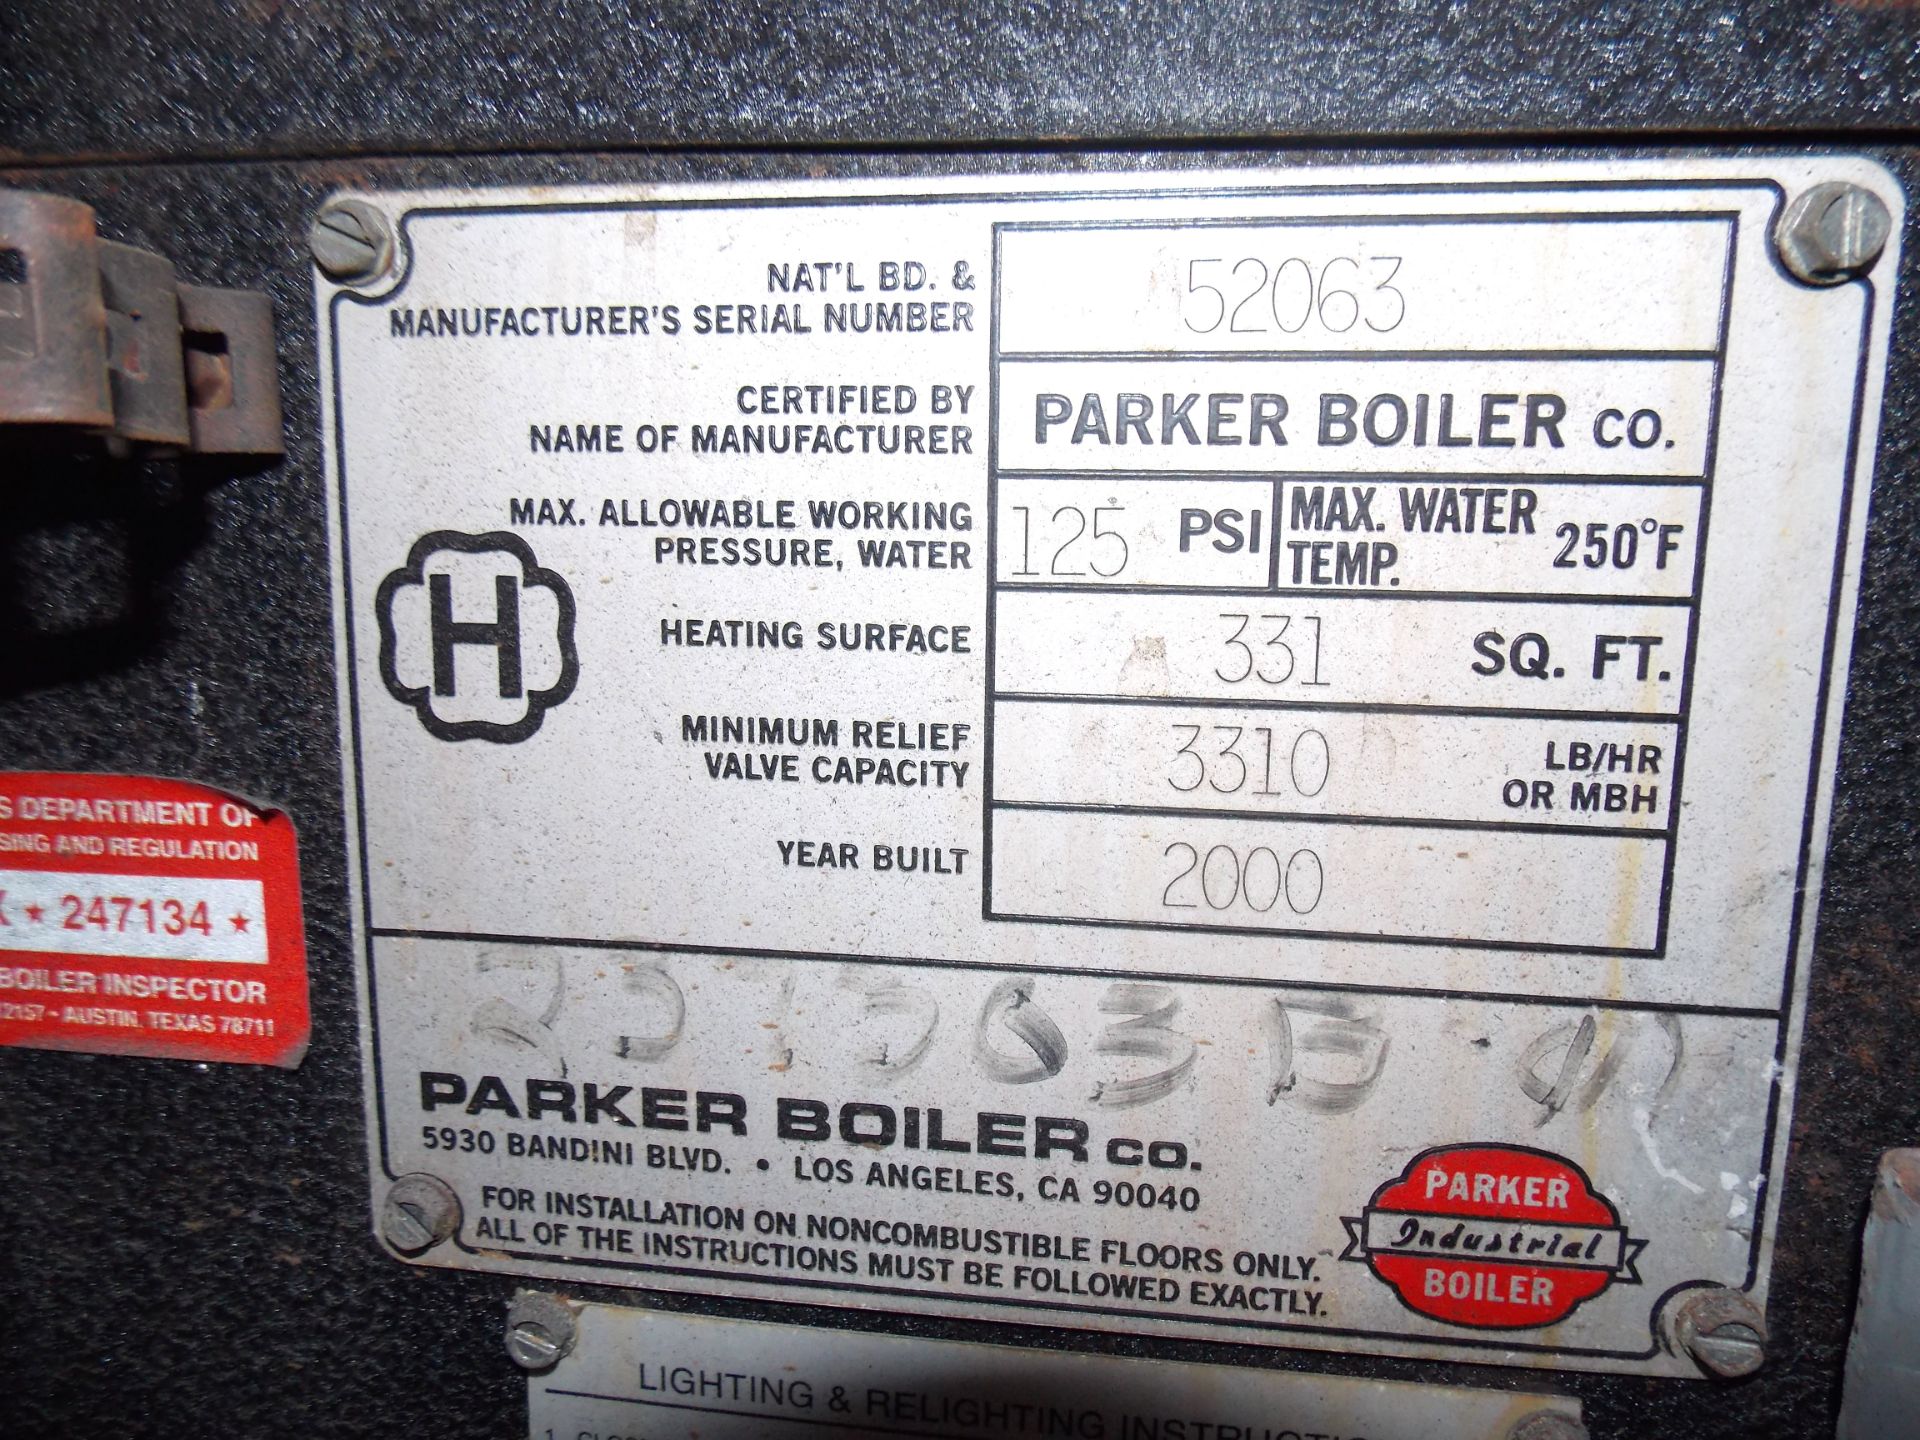 Parker Hot Water Boiler Model: 331 Square Feet Serial: 52063 Year: 2000331 Square Feet, Certified, - Image 3 of 4